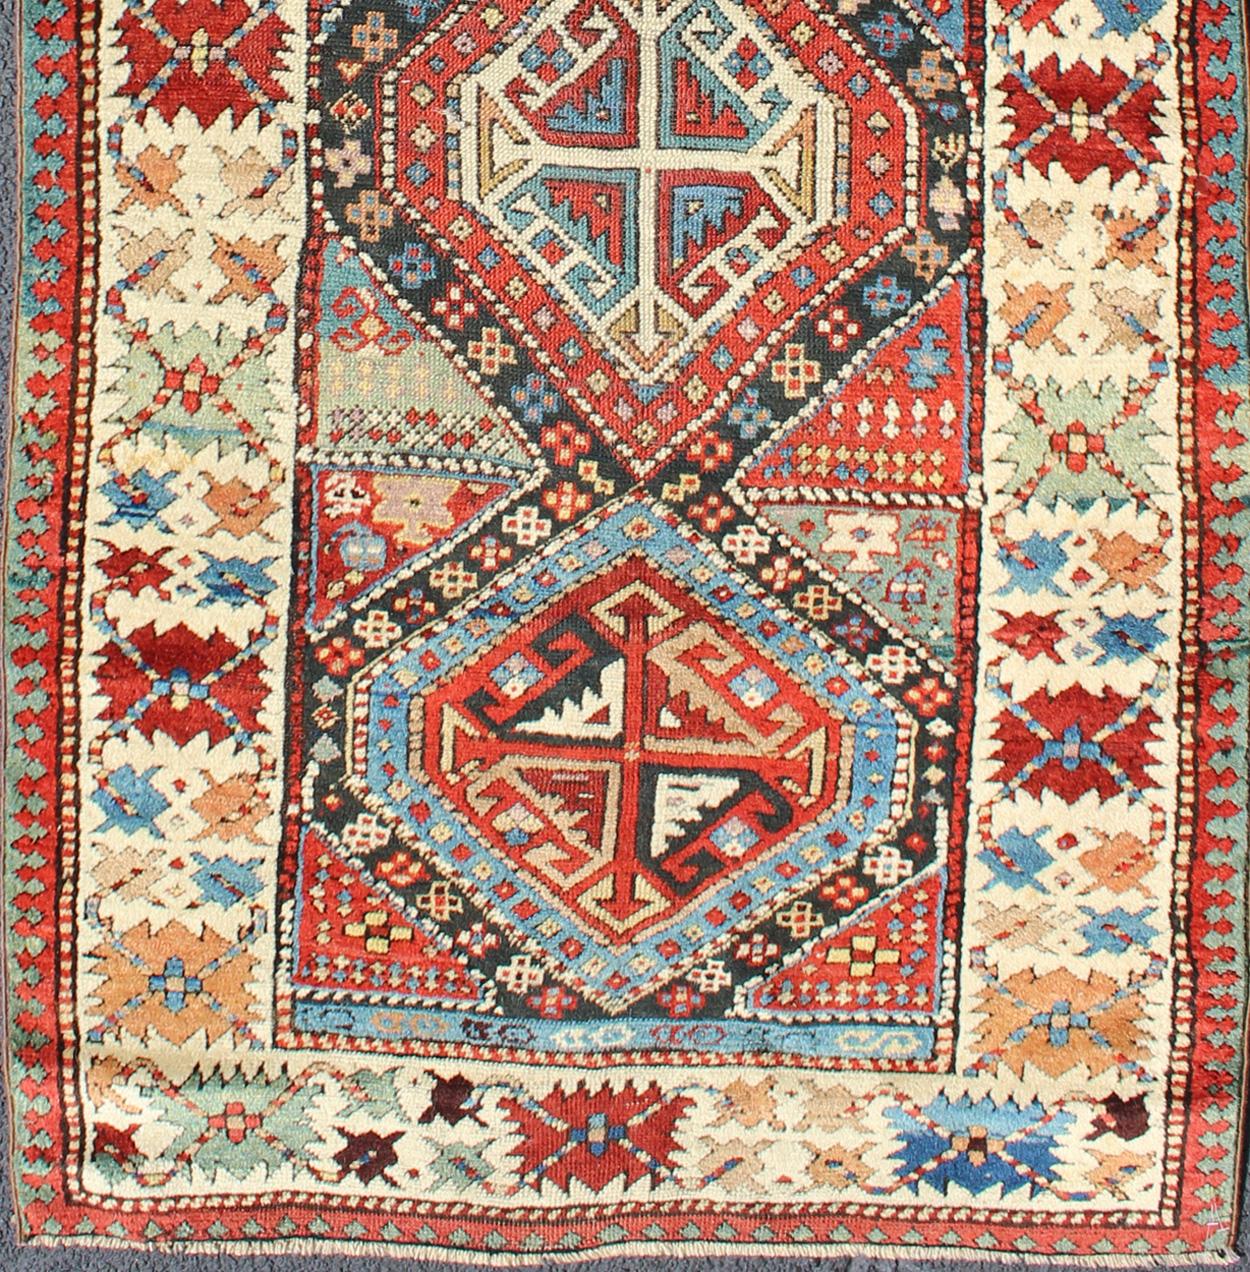 Antique Caucasian Kuba Rug with Intricate and Complex Design.
This beautiful piece is a late 19th century Kuba rug with an indigo blue field beneath a geometric vinery trellis featuring bold polychrome medallions and stylized leaves. The ivory frame